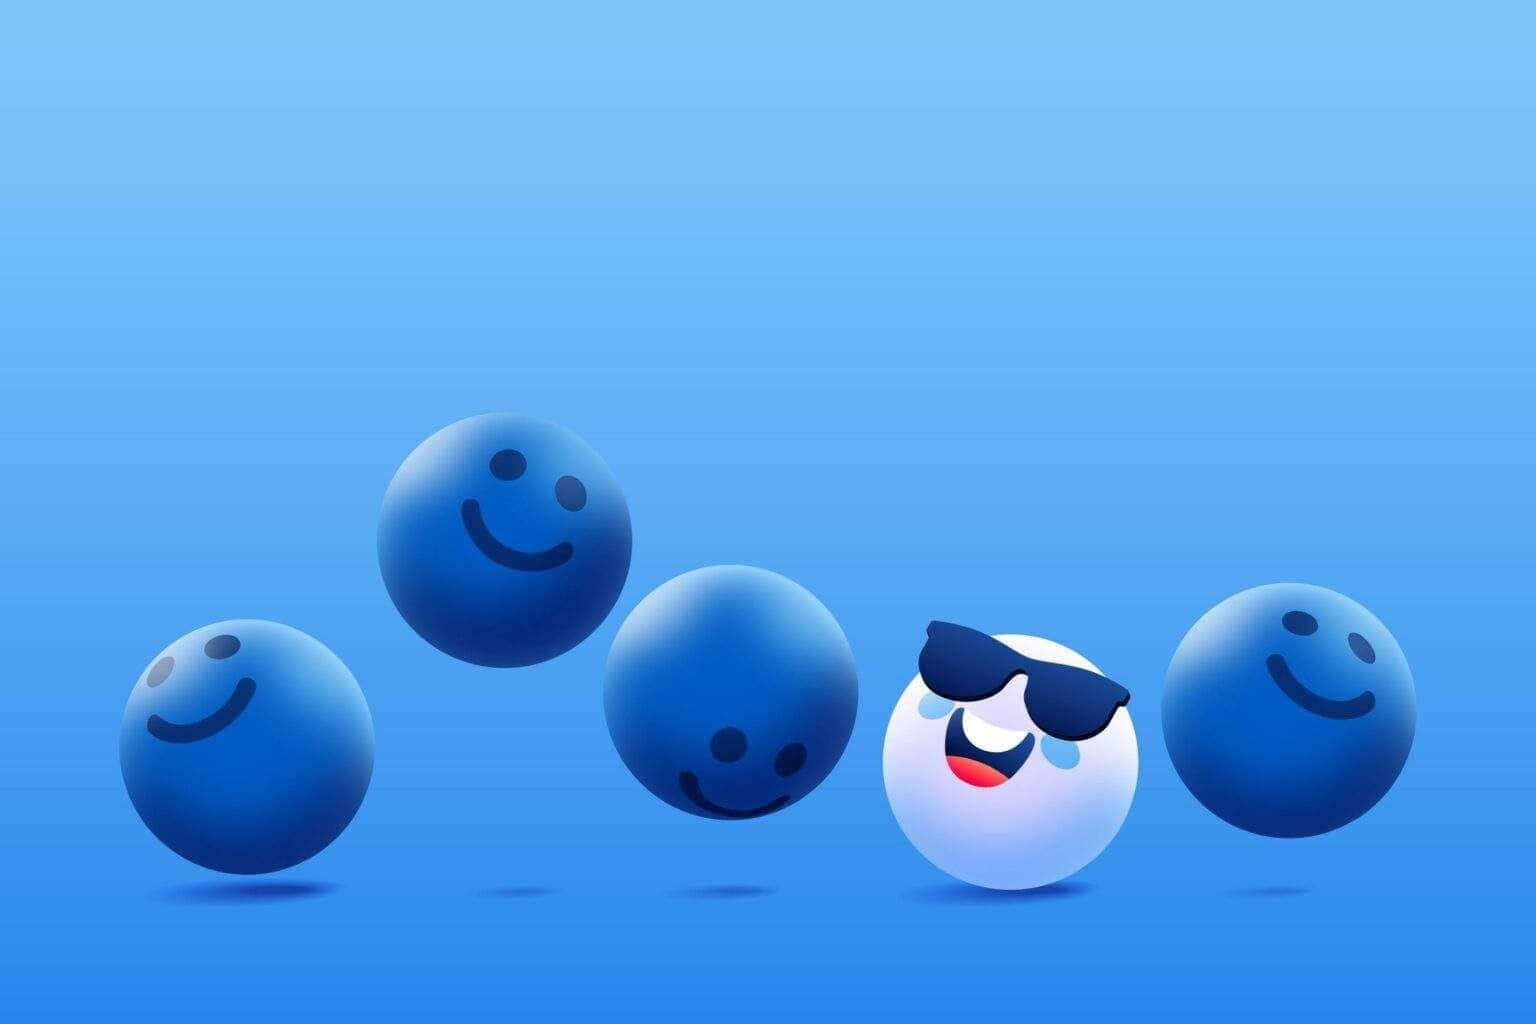 Blue Smiley Faceswith One Unique Character Wallpaper